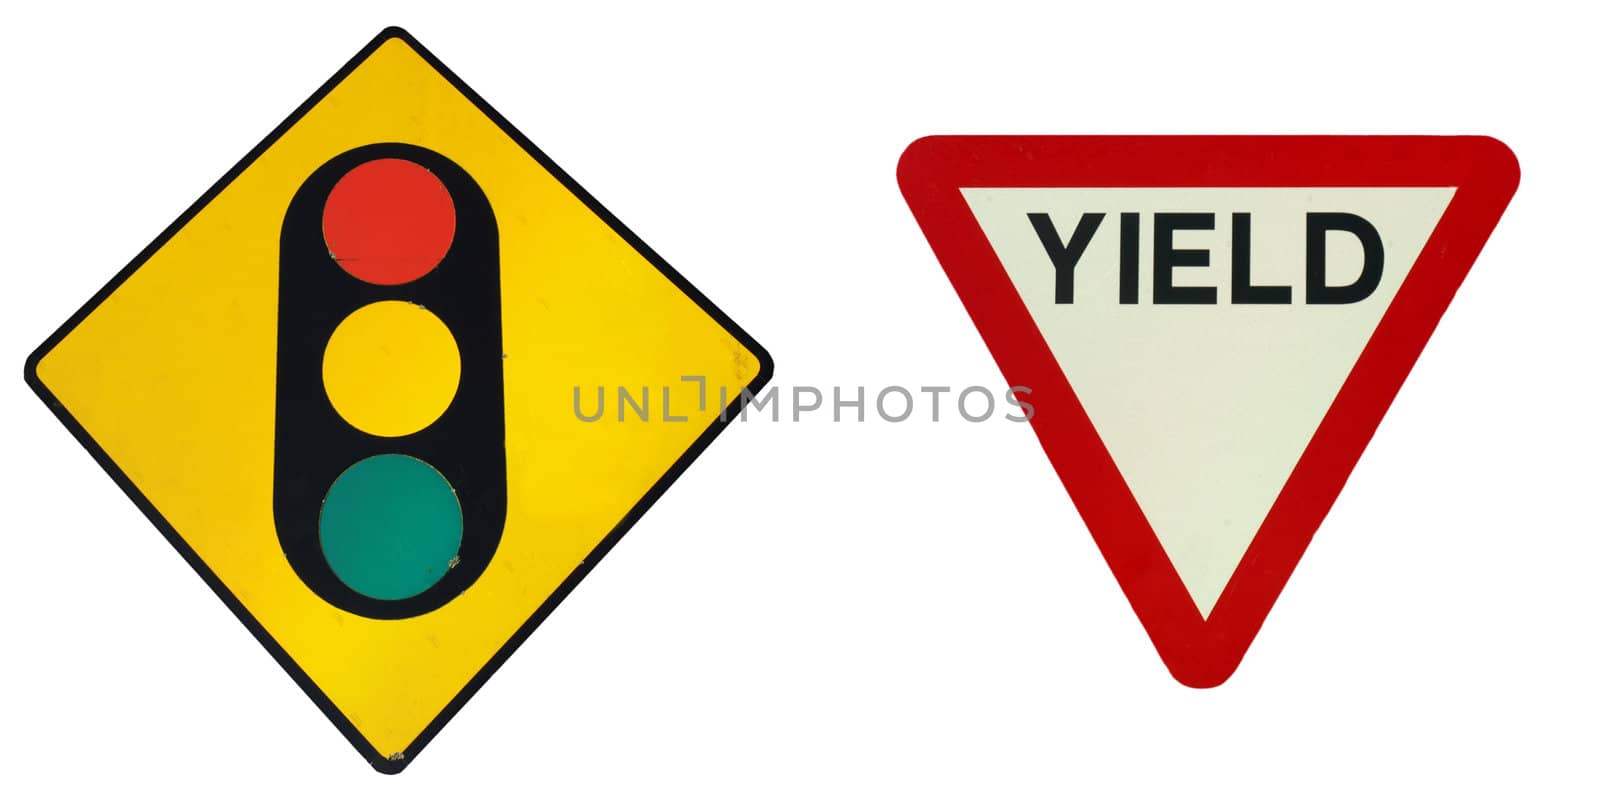 Traffic signs by claudiodivizia